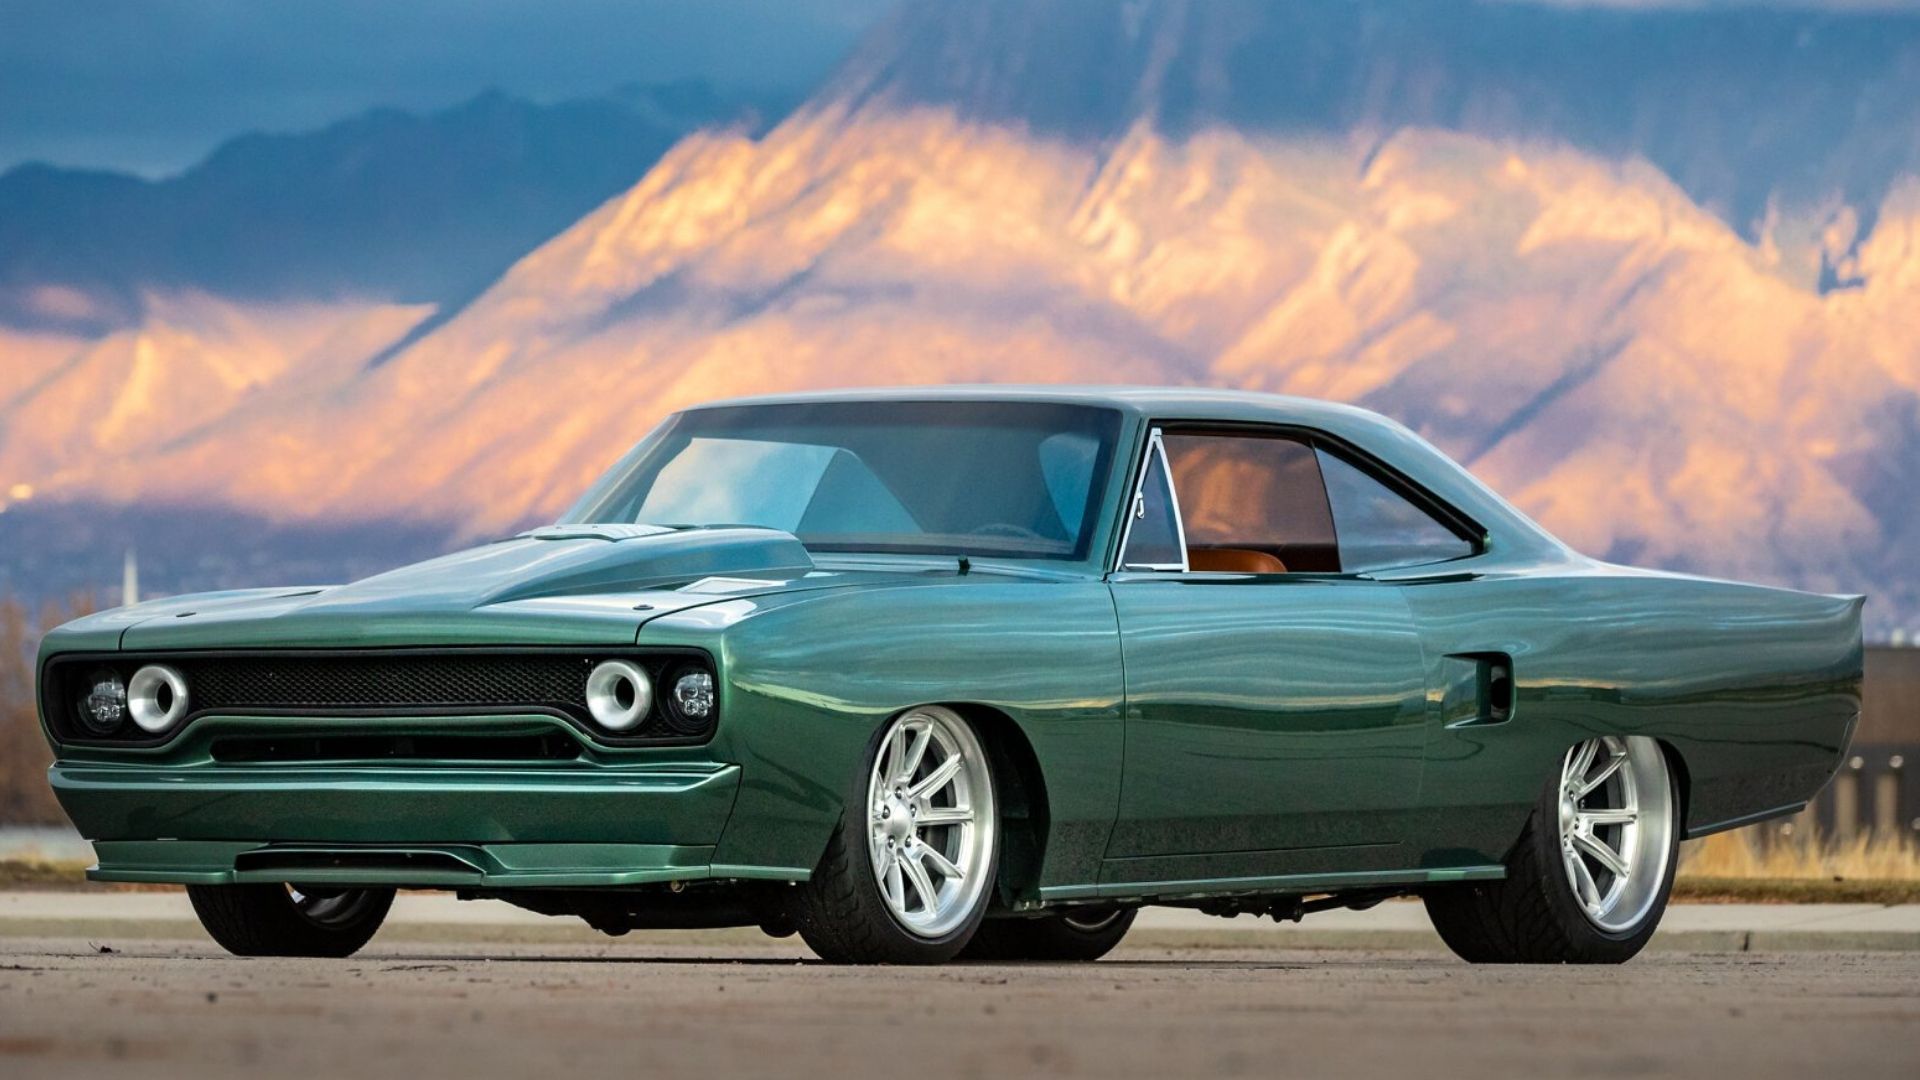 A Hellcat Powers This 1970 Plymouth Sport Satellite